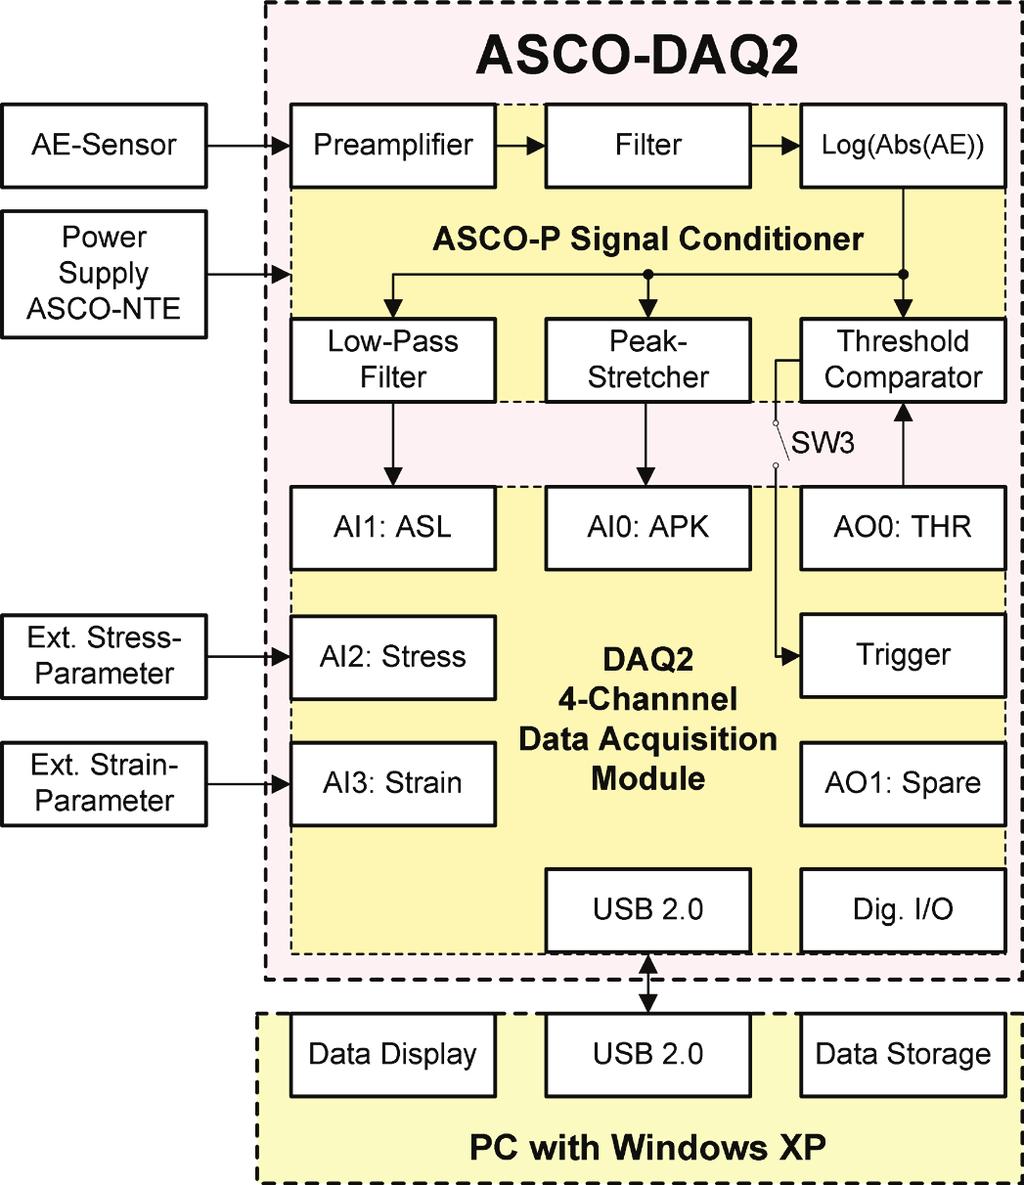 2.2 Functional description of the DAQ2 module The DAQ2 module is based on the USB- data acquisition module: National Instruments USB-6009 OEM.